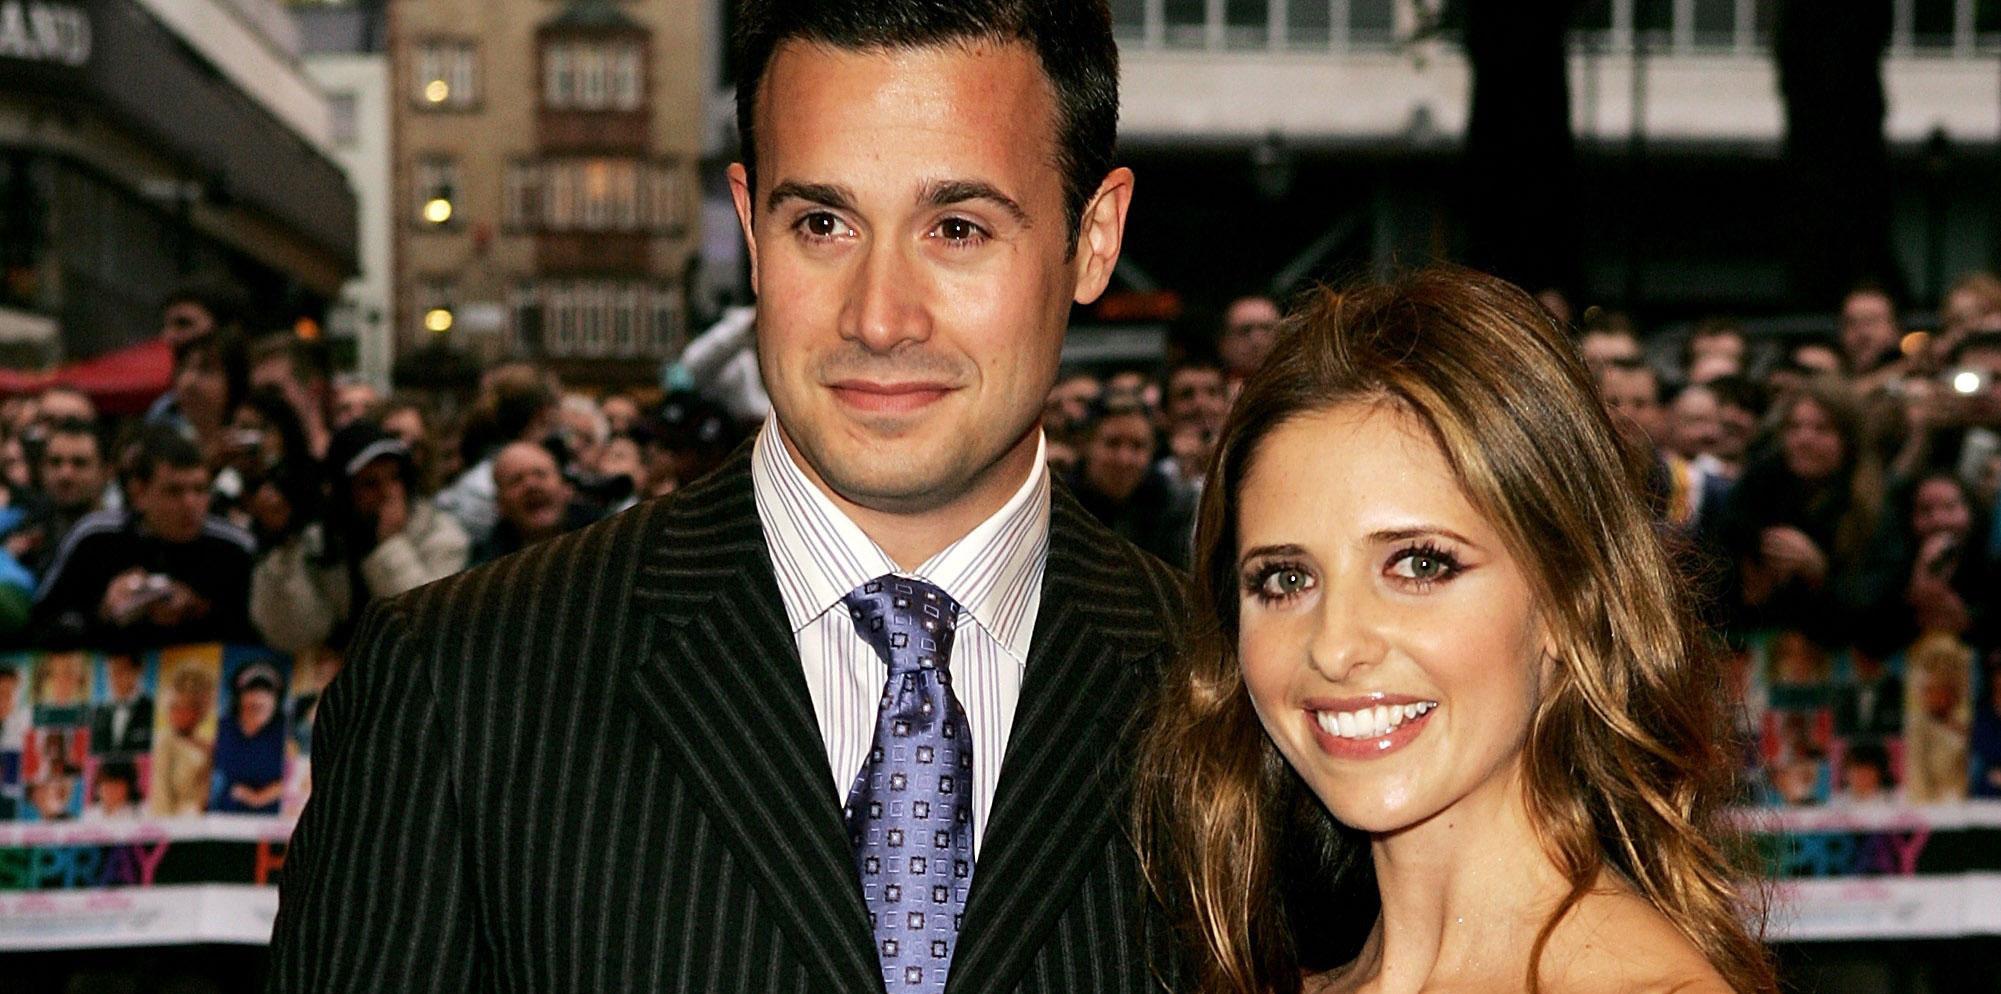 These 15 Celebrity Marriages Actually Lasted And We Need To Know Their Secrets